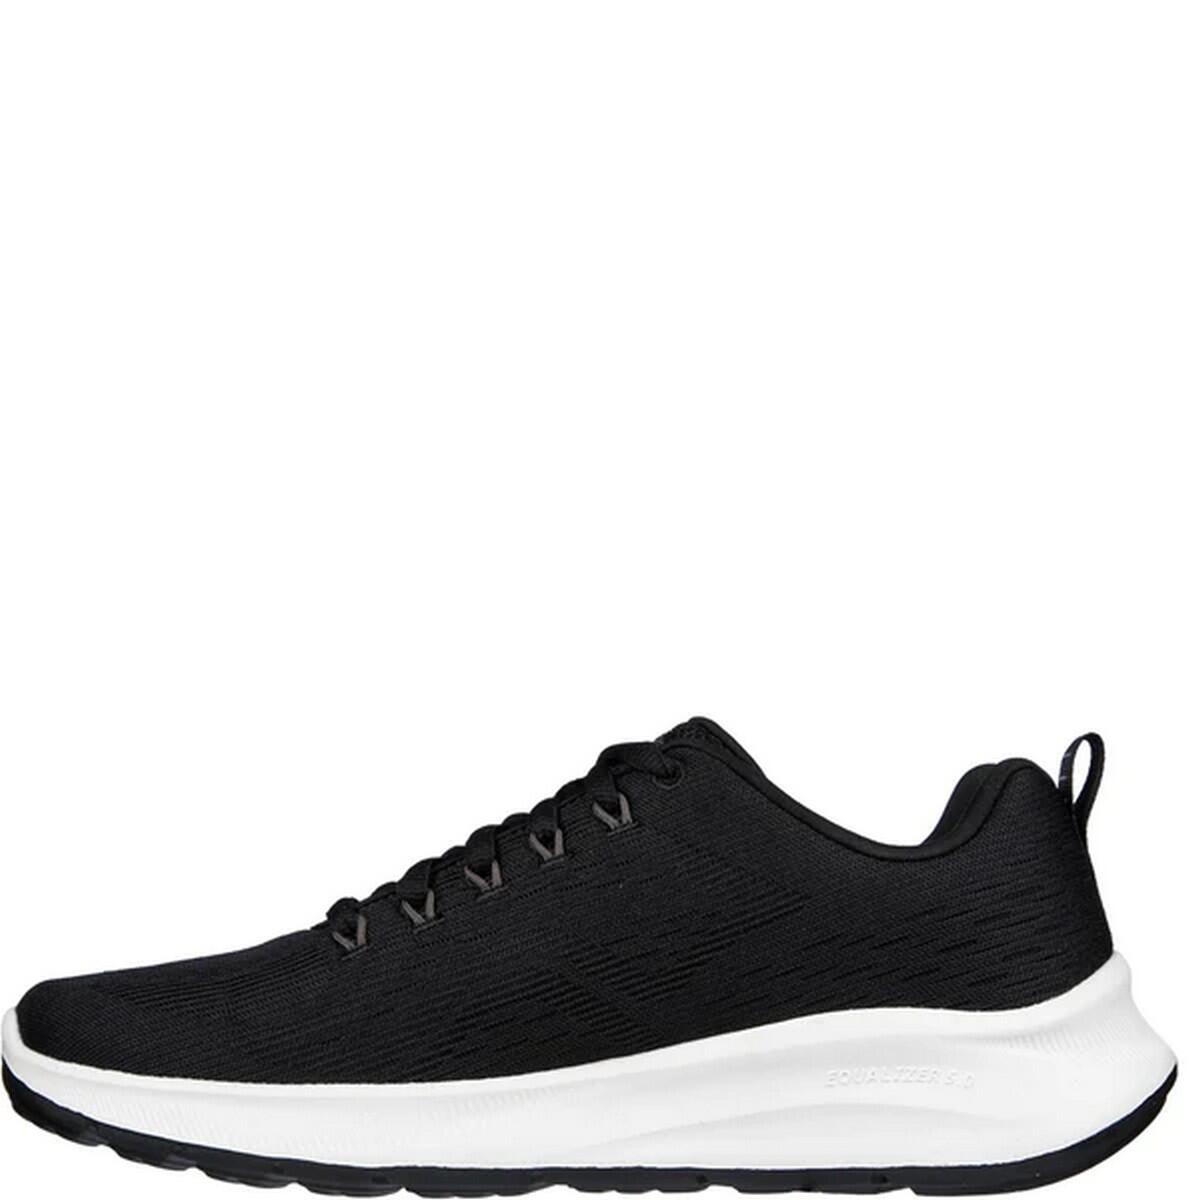 Mens Equalizer 5.0 Trainers (Black/White) 2/5